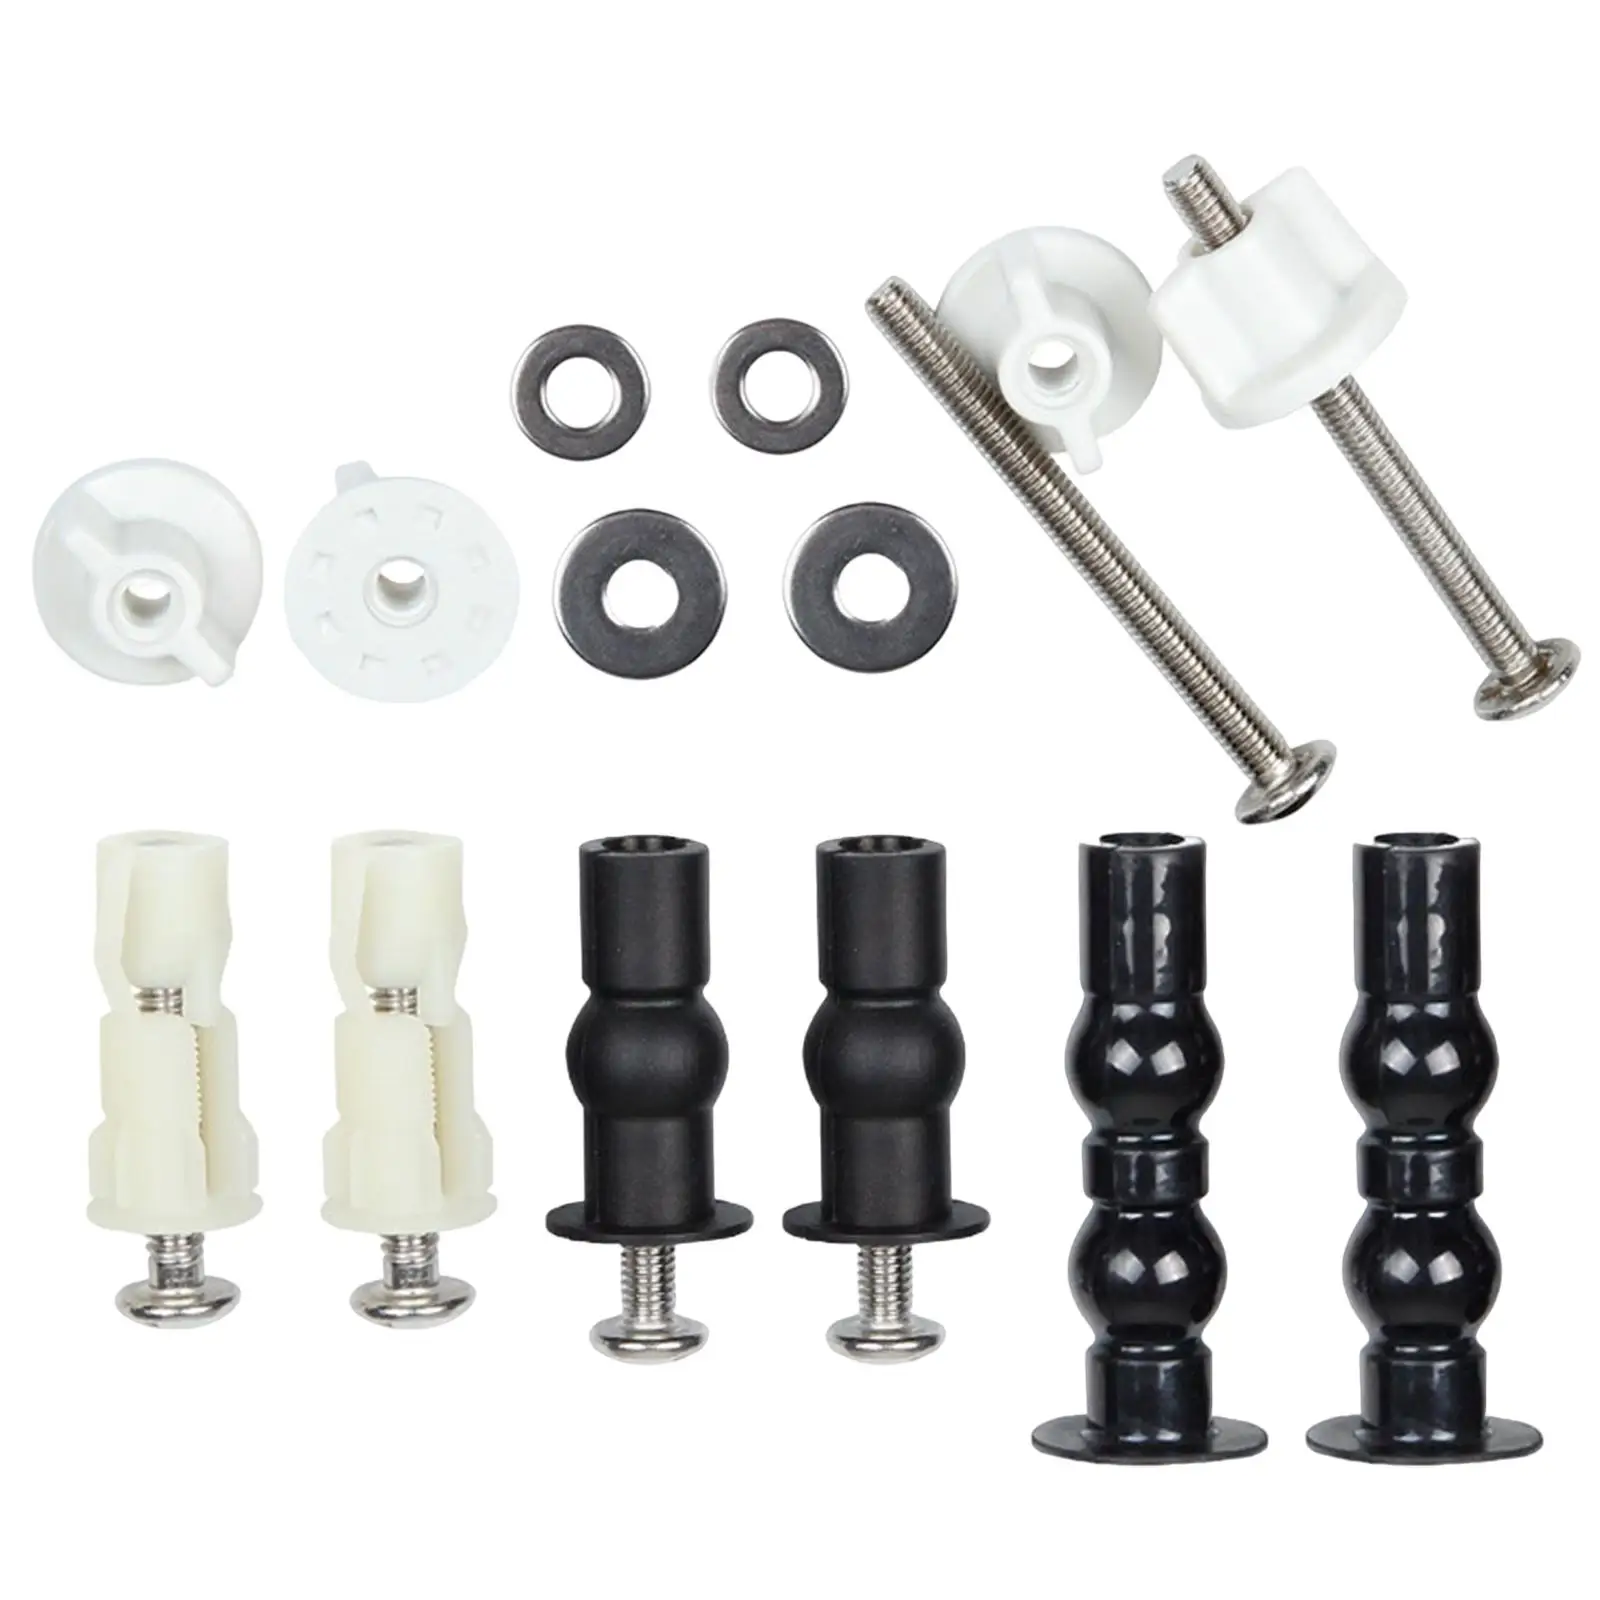 Universal Toilet Seats Screws Bolts Toilet Seat Parts Expanding Nuts Screws Mount Easy to Install Hardware Fixtures